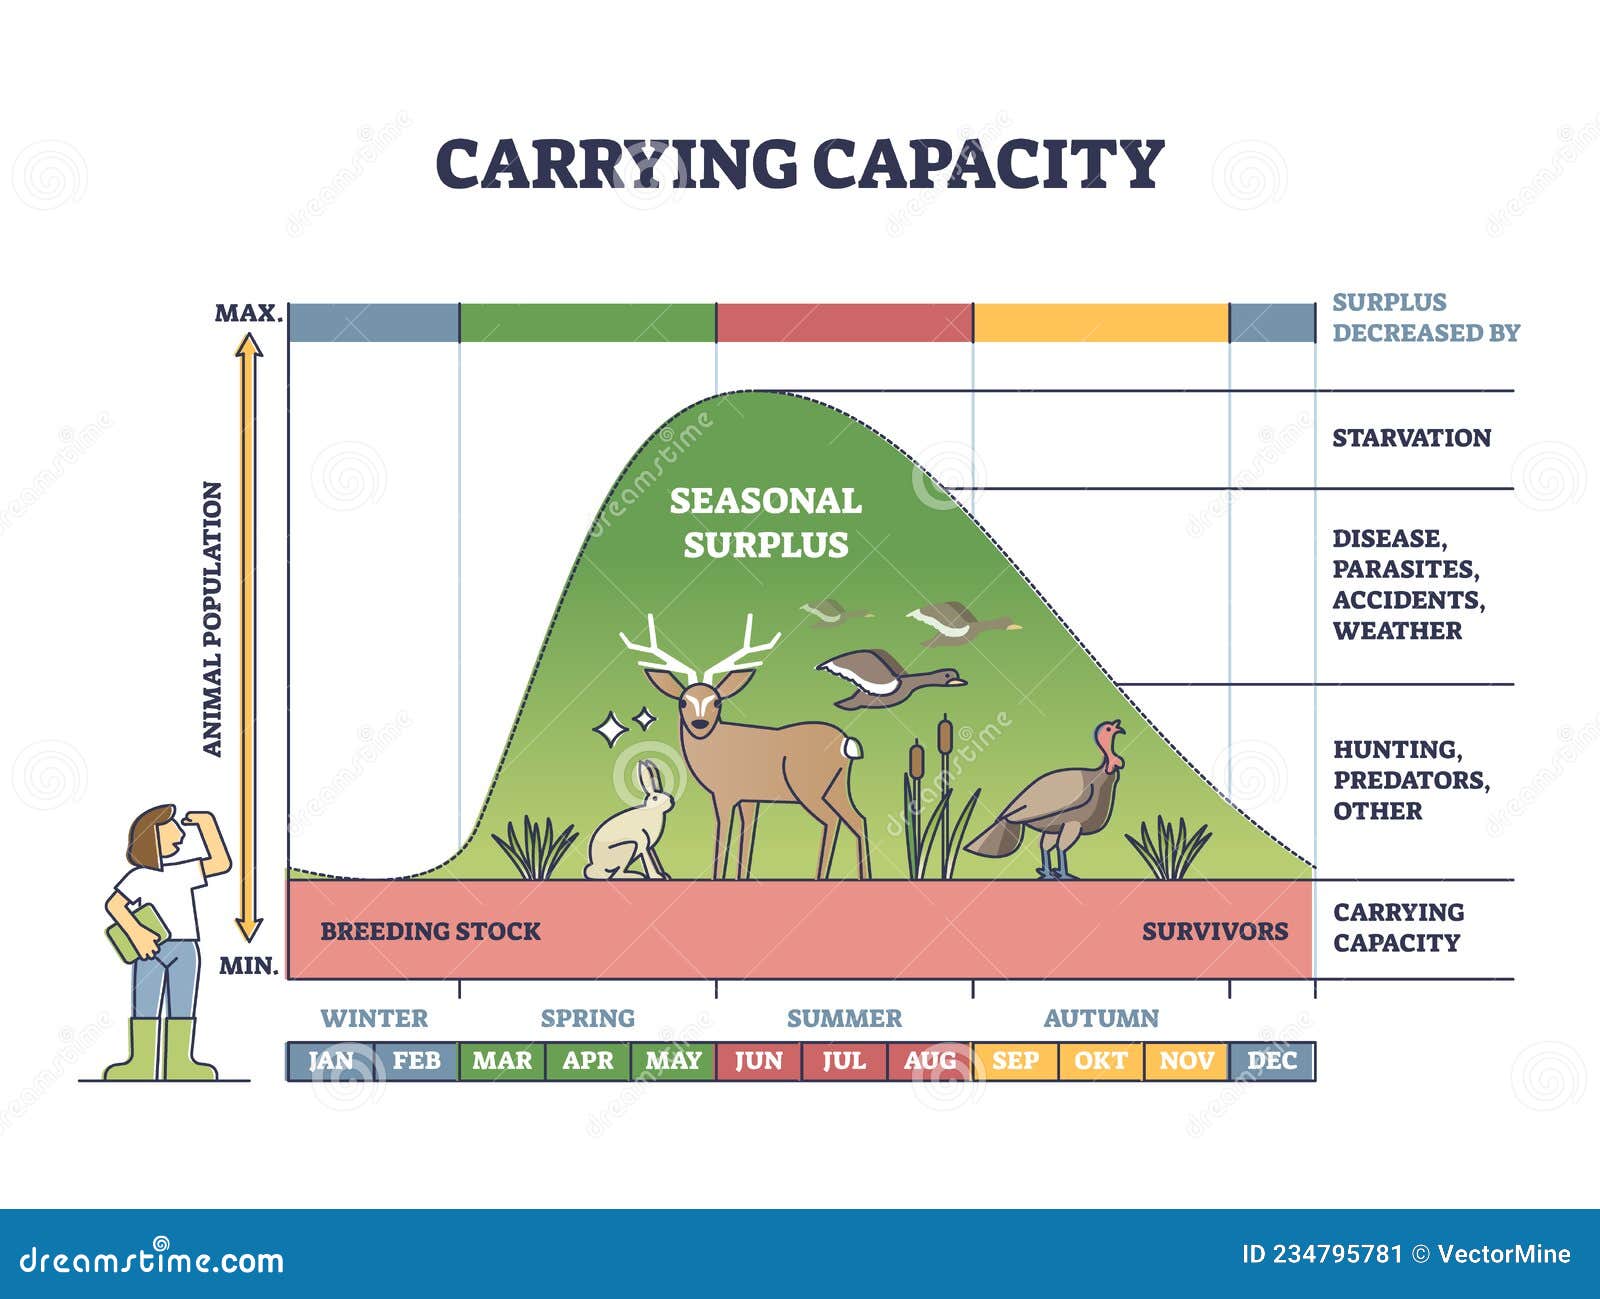 carrying capacity as reproduction level with seasonal surplus outline diagram